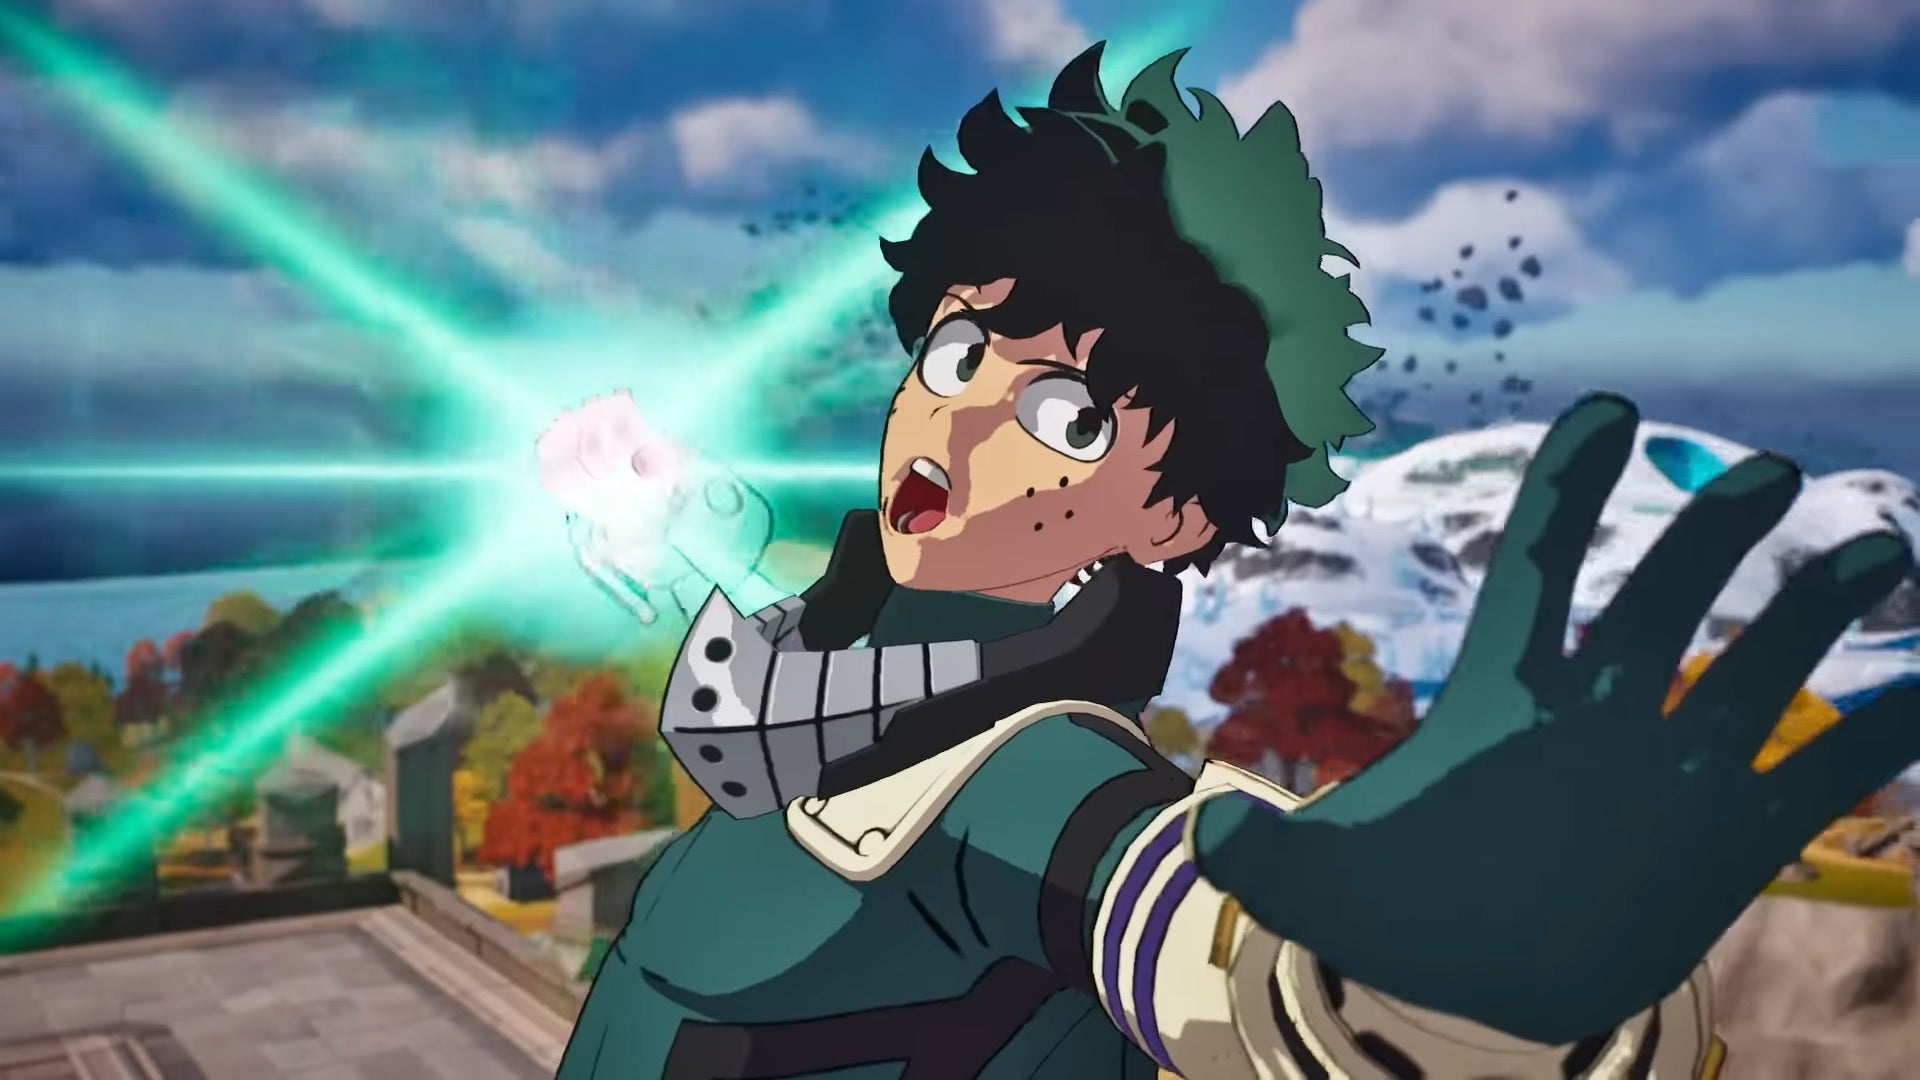 Deku Smash removed from Fortnite due to in-game “issues”